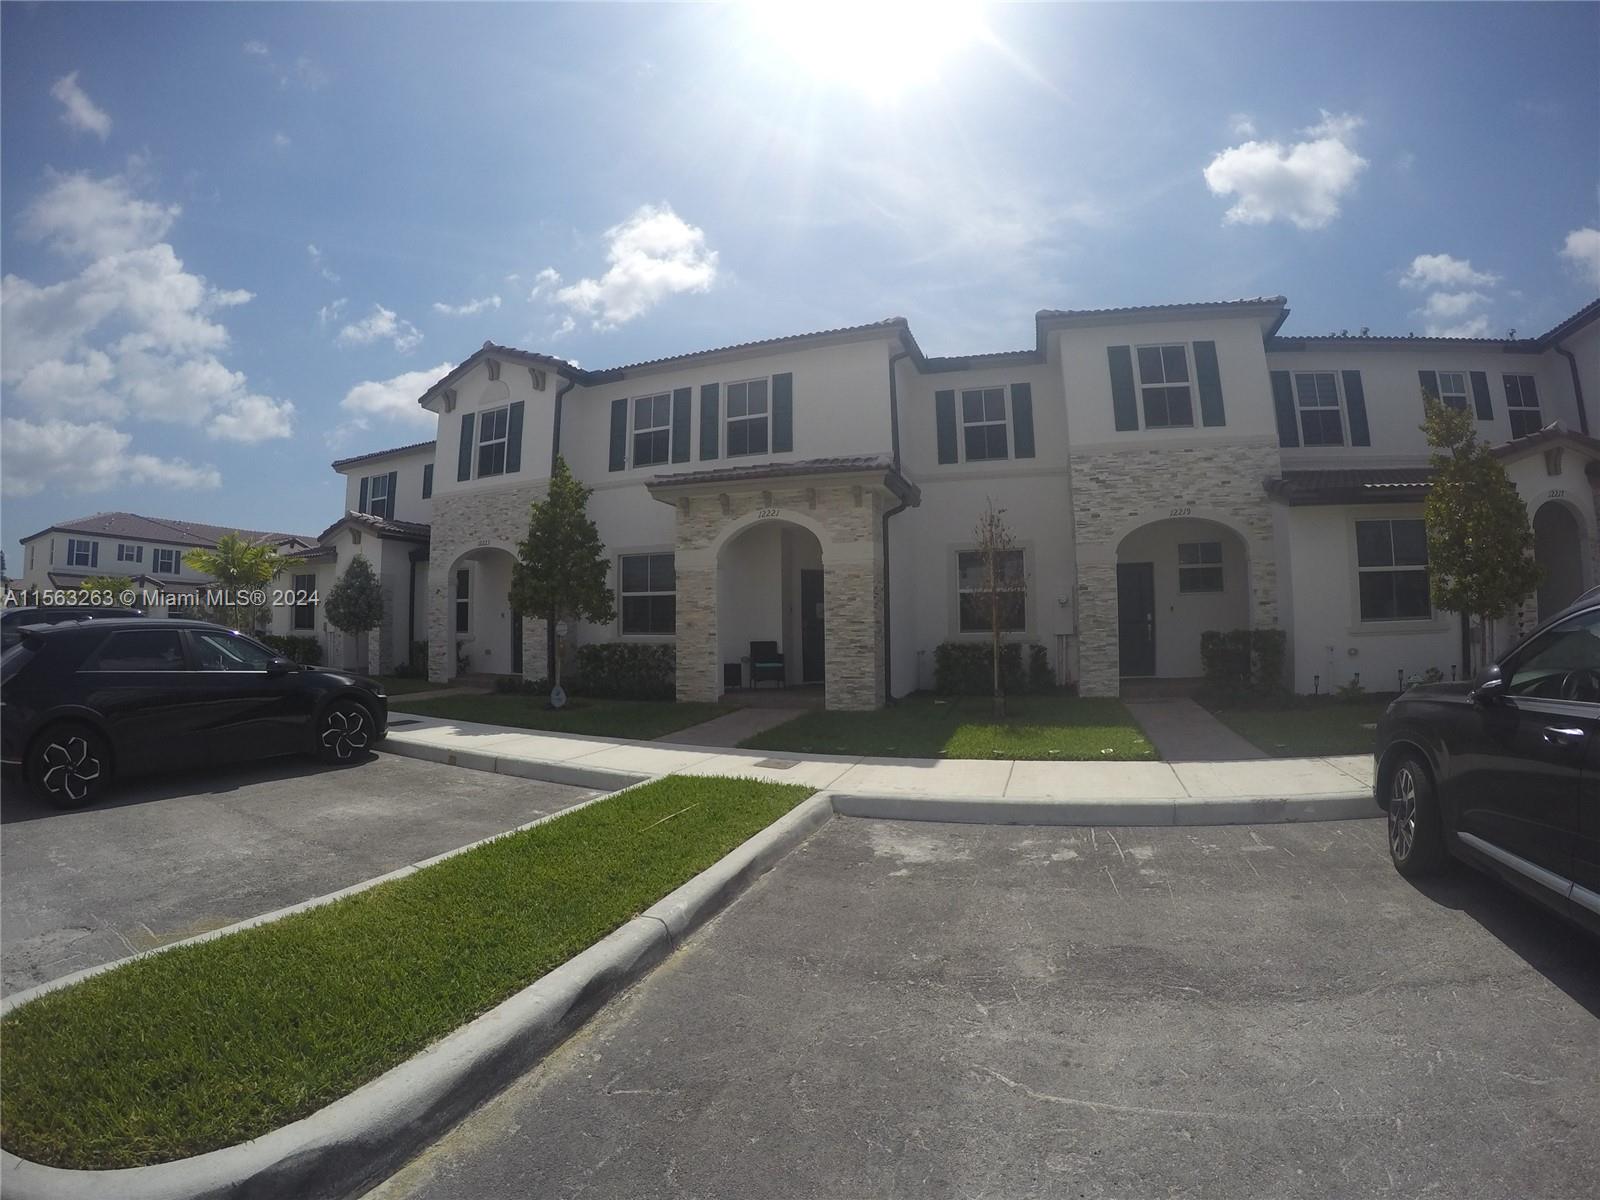 12221 NW 23rd Pl #12221 For Sale A11563263, FL